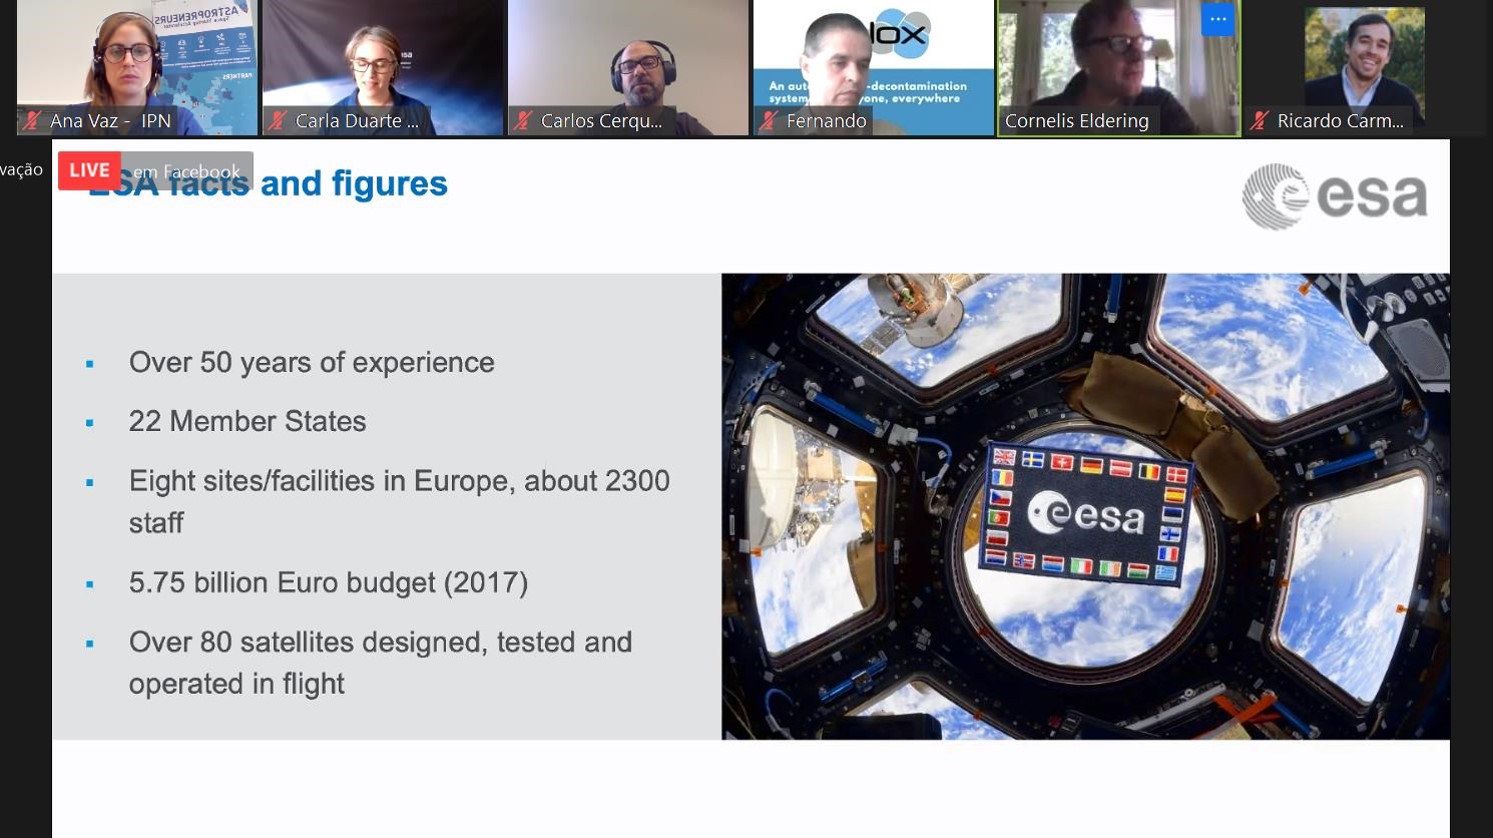 Portugal Space Summer School participants learned more about ESA through a webinar with Cornelis Eldering, Head of ESA Space Solutions section, entitles ‘We all need more space’